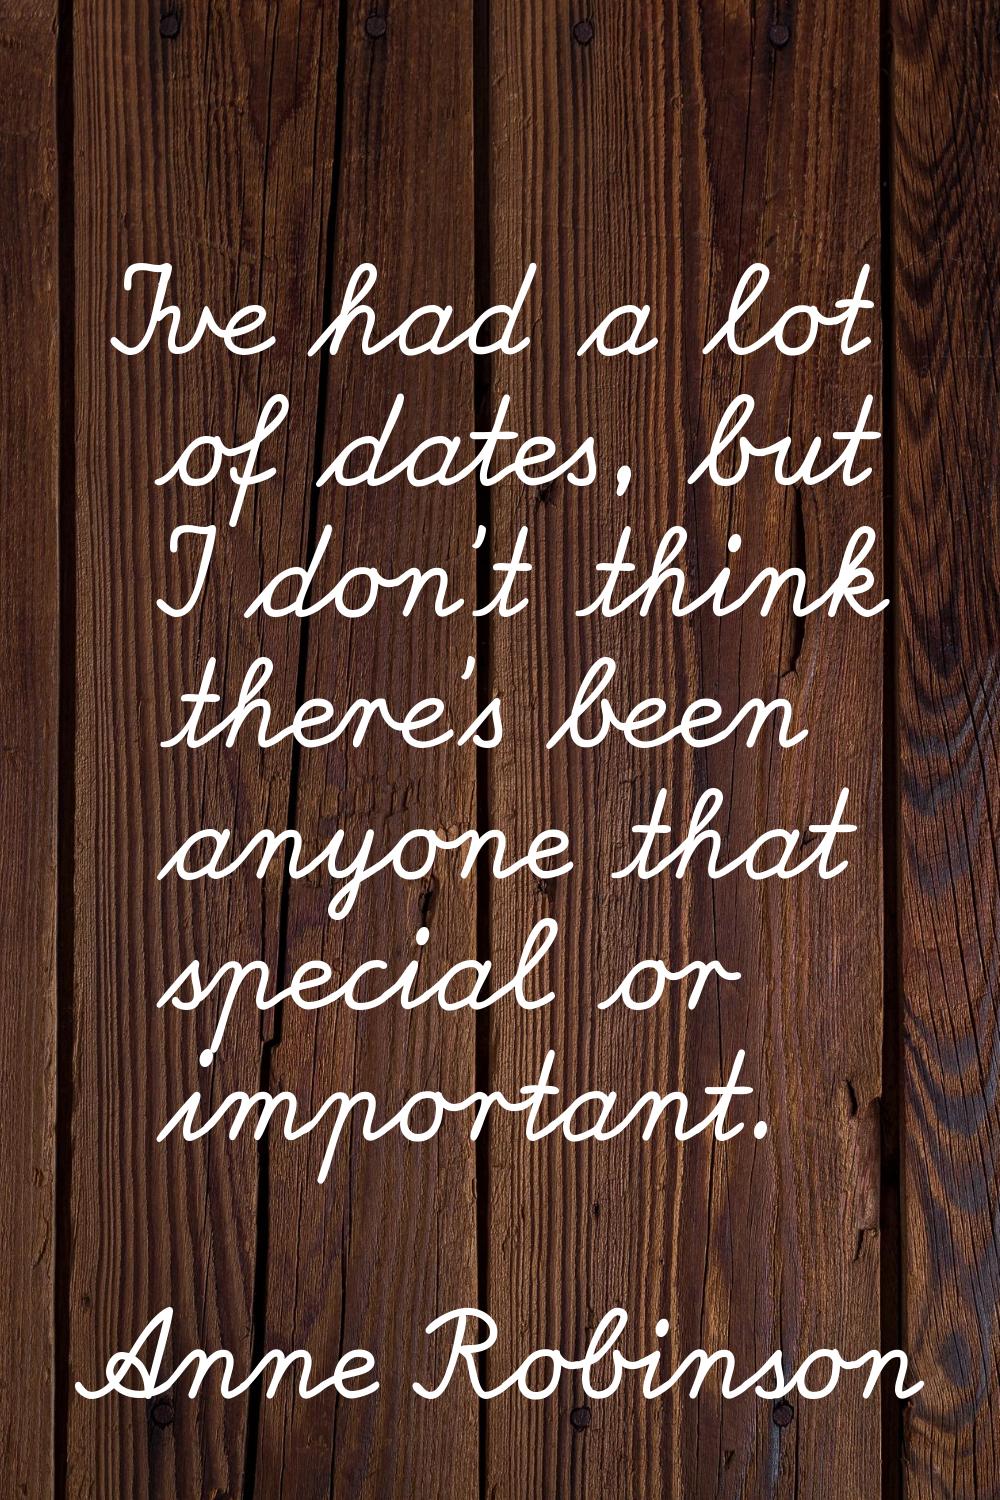 I've had a lot of dates, but I don't think there's been anyone that special or important.